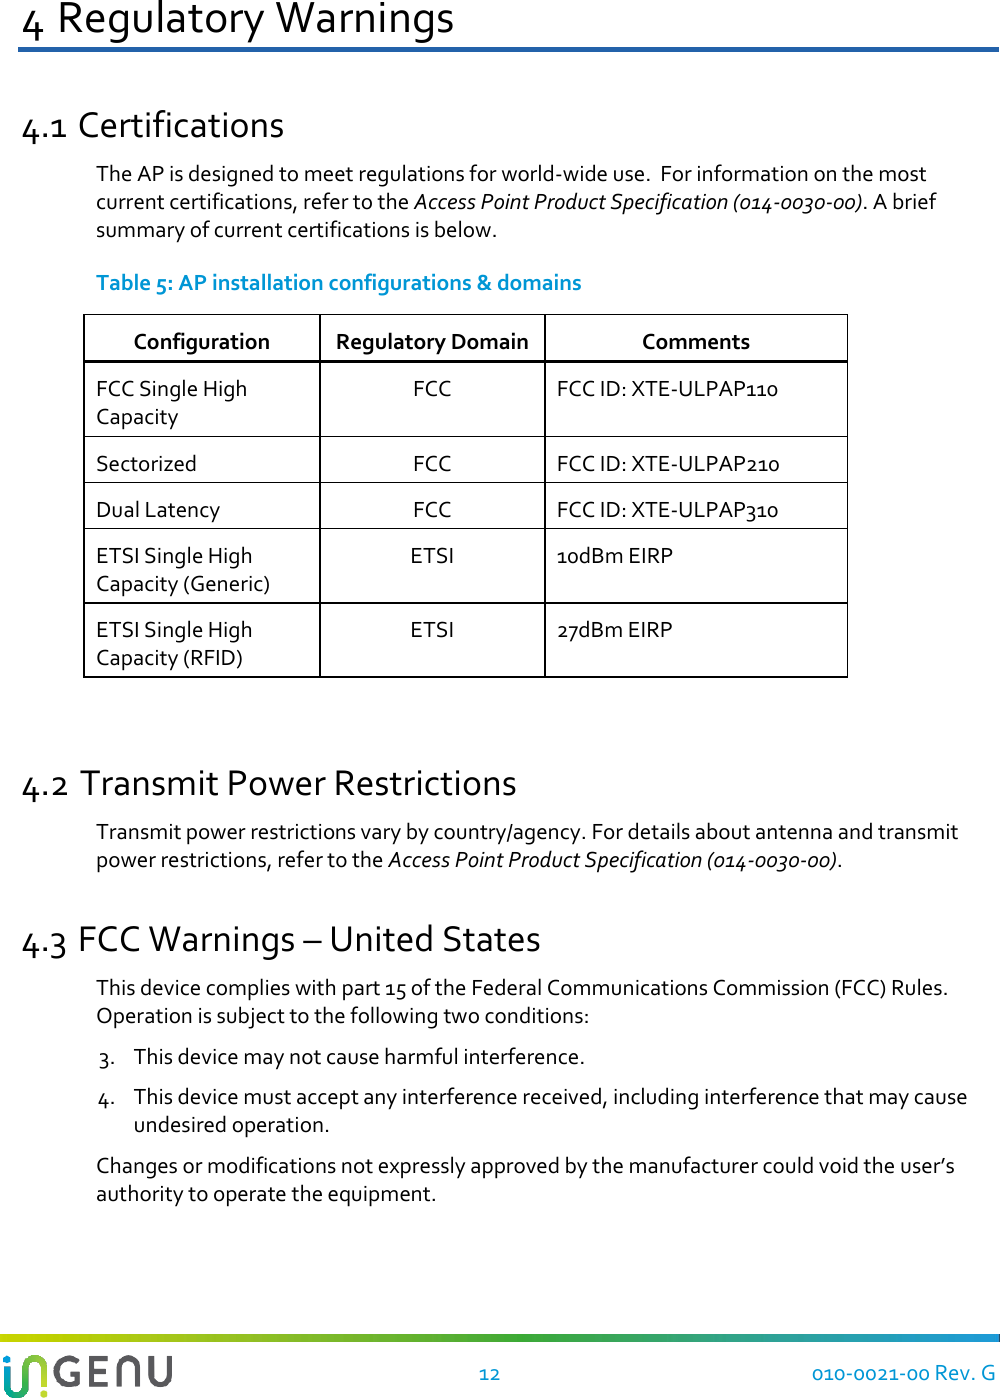   12 010-0021-00 Rev. G 4 Regulatory Warnings 4.1 Certifications The AP is designed to meet regulations for world-wide use.  For information on the most current certifications, refer to the Access Point Product Specification (014-0030-00). A brief summary of current certifications is below. Table 5: AP installation configurations &amp; domains Configuration Regulatory Domain Comments FCC Single High Capacity FCC FCC ID: XTE-ULPAP110 Sectorized FCC FCC ID: XTE-ULPAP210 Dual Latency FCC FCC ID: XTE-ULPAP310 ETSI Single High Capacity (Generic) ETSI 10dBm EIRP ETSI Single High Capacity (RFID) ETSI 27dBm EIRP  4.2 Transmit Power Restrictions Transmit power restrictions vary by country/agency. For details about antenna and transmit power restrictions, refer to the Access Point Product Specification (014-0030-00). 4.3 FCC Warnings – United States This device complies with part 15 of the Federal Communications Commission (FCC) Rules. Operation is subject to the following two conditions:  3. This device may not cause harmful interference. 4. This device must accept any interference received, including interference that may cause undesired operation. Changes or modifications not expressly approved by the manufacturer could void the user’s authority to operate the equipment. 